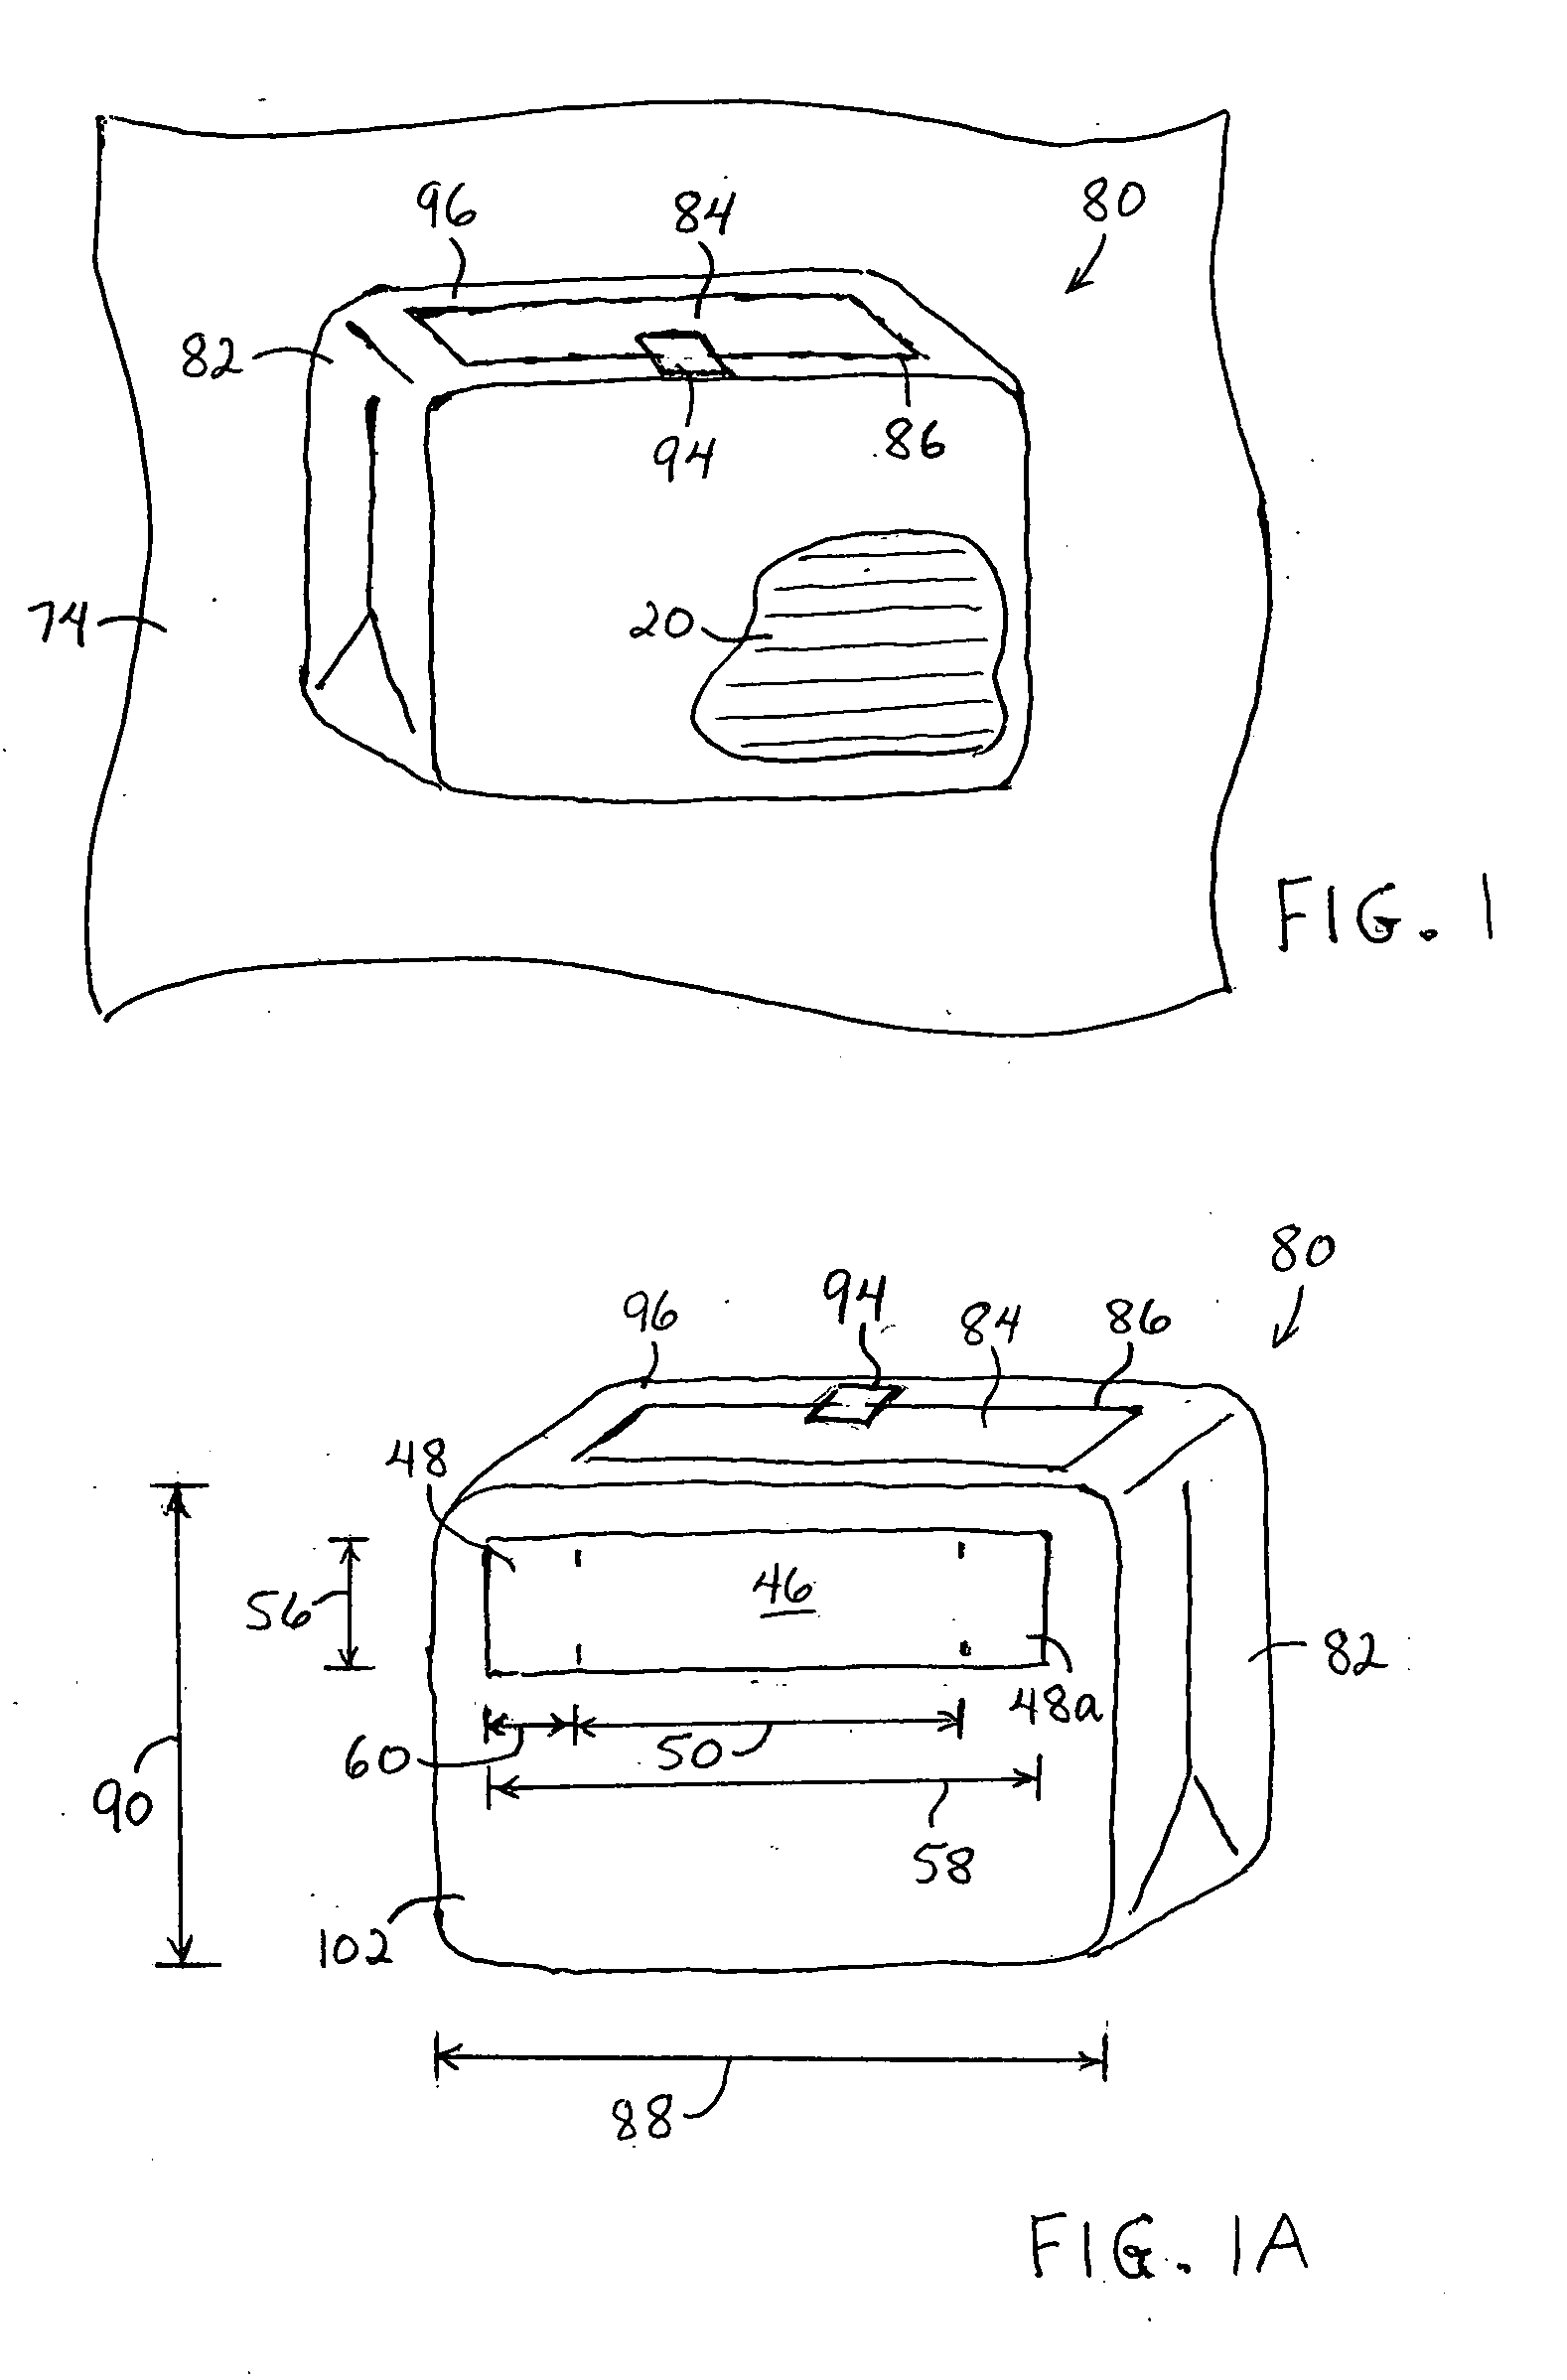 Disposable package with a repositioning attachment feature